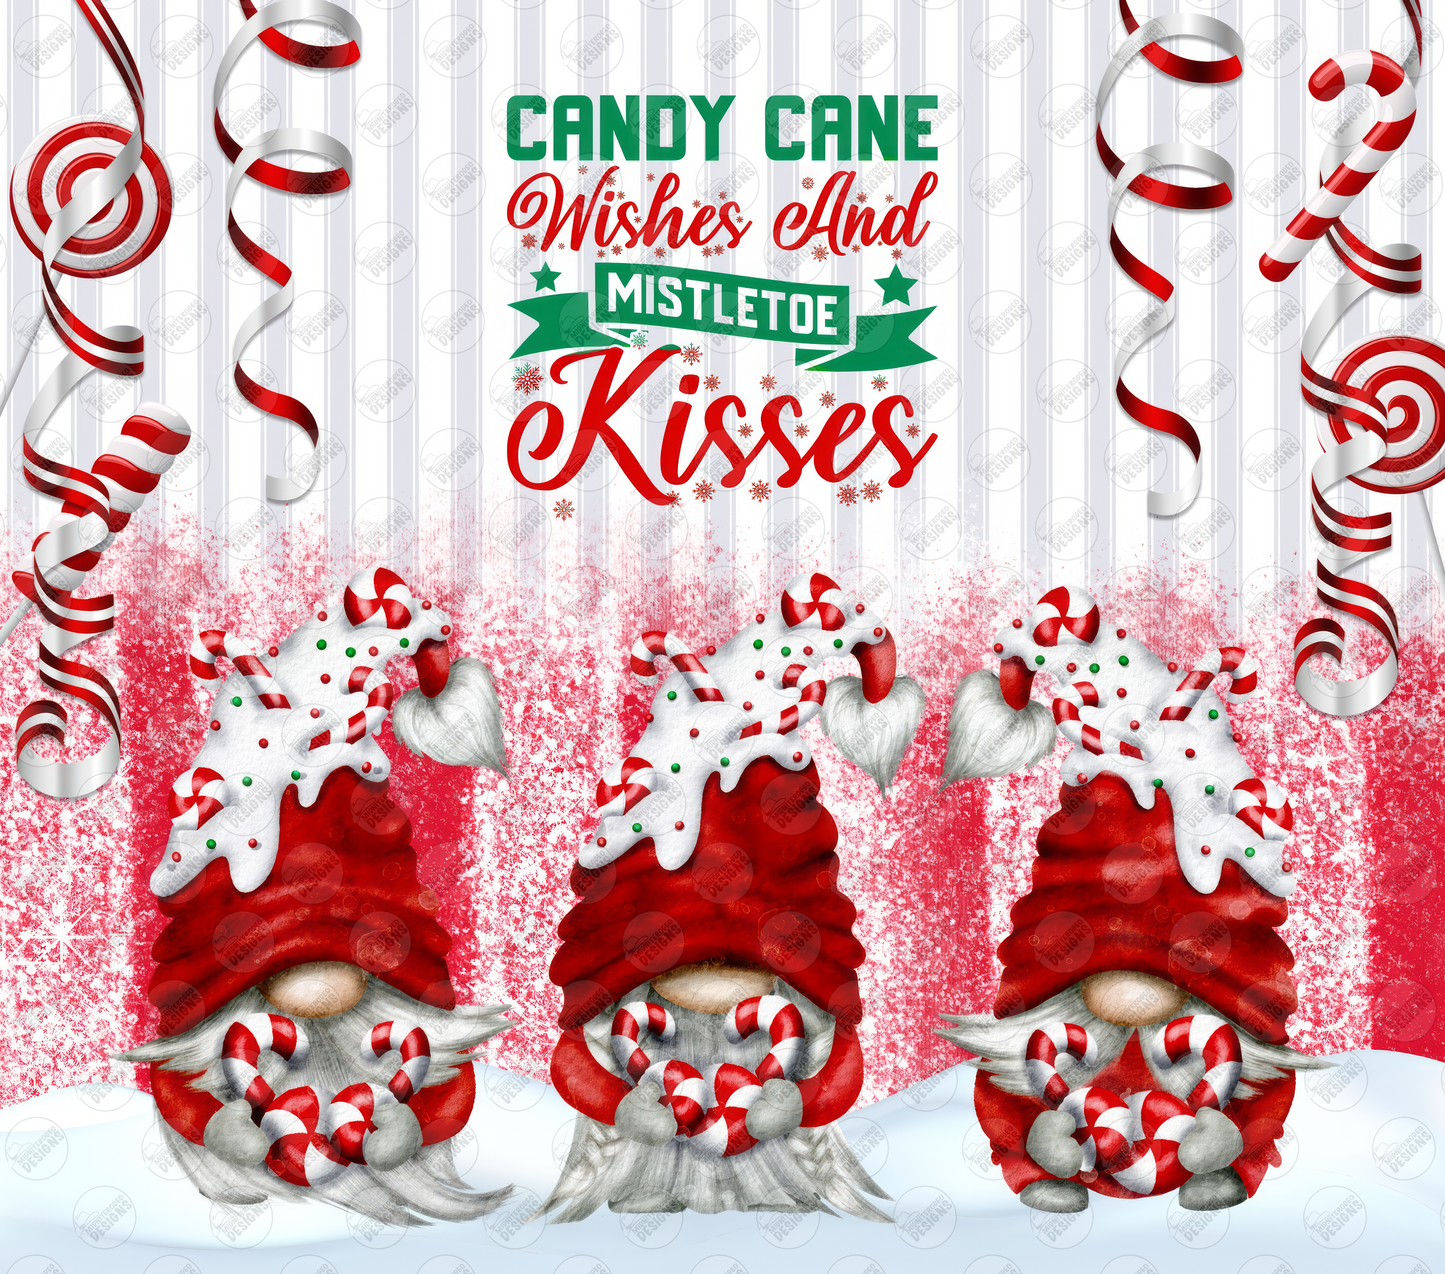 Candy Cane Wishes and Mistletoe Kisses Gnomes Tumbler